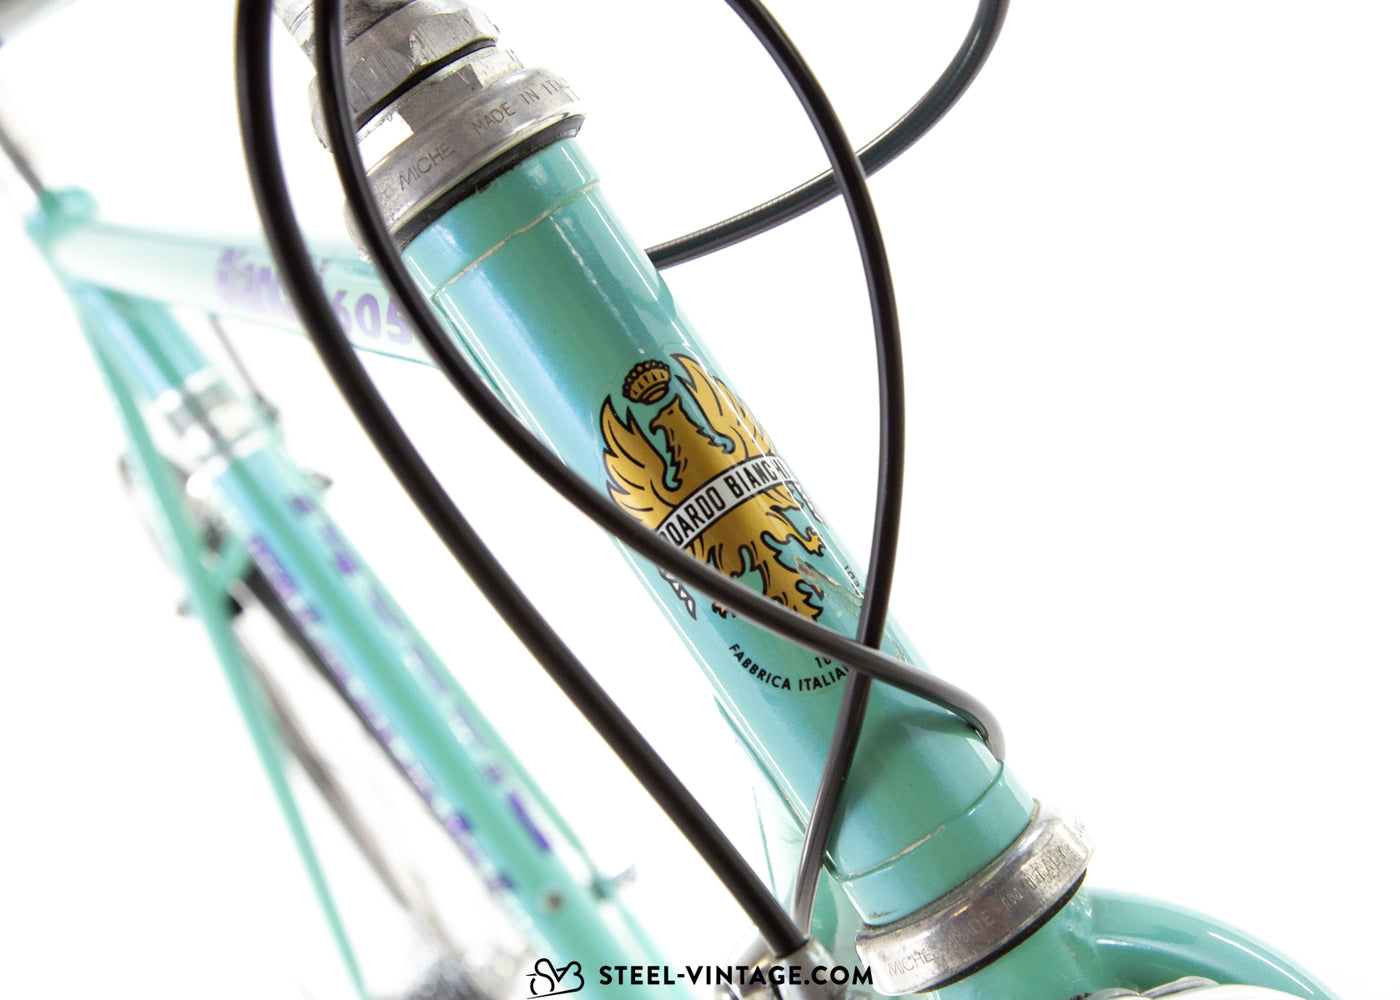 Bianchi 605 Celeste Road Bicycle 1990s